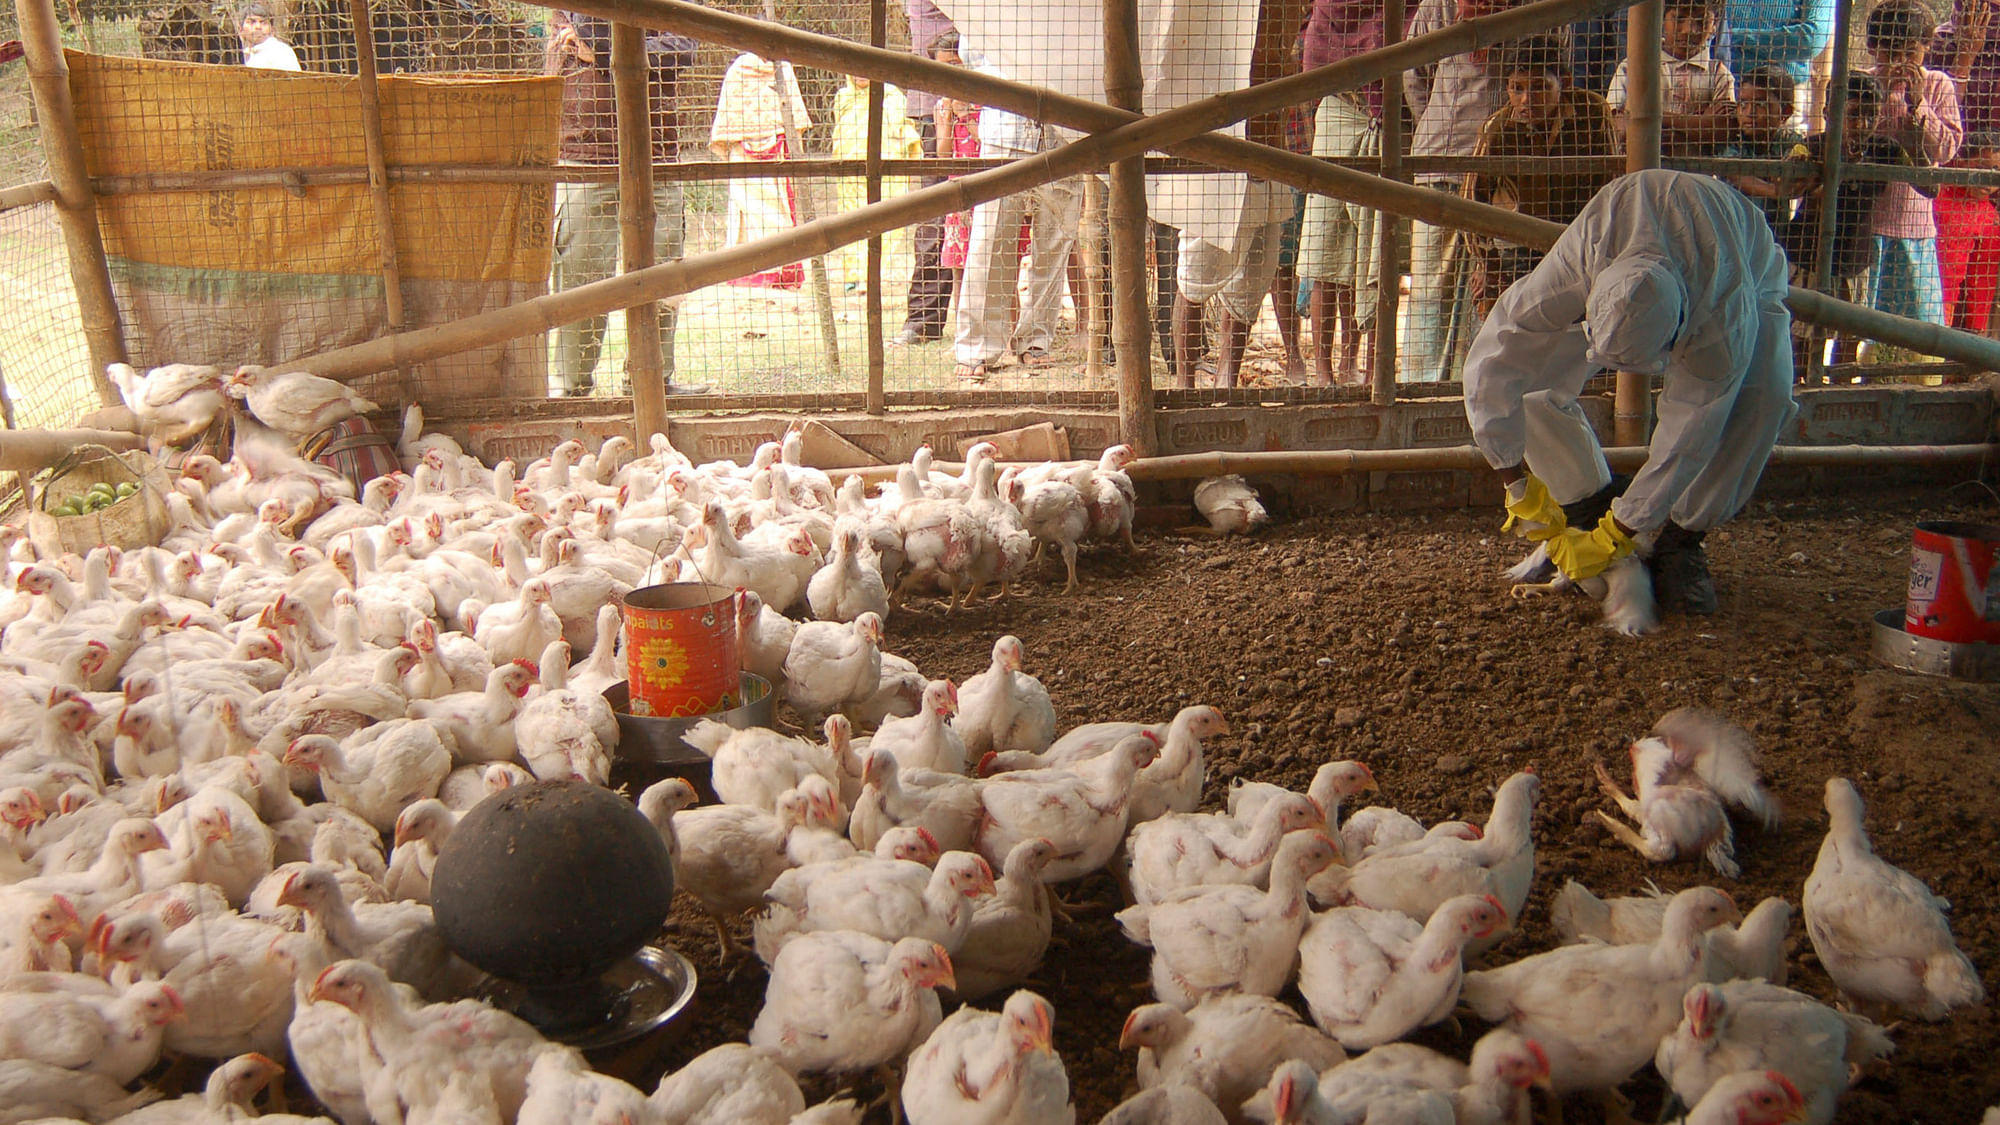 A health worker is seen giving ‘medicine’ to the chickens at a poultry farm. Image used for representation. (Photo: Reuters)